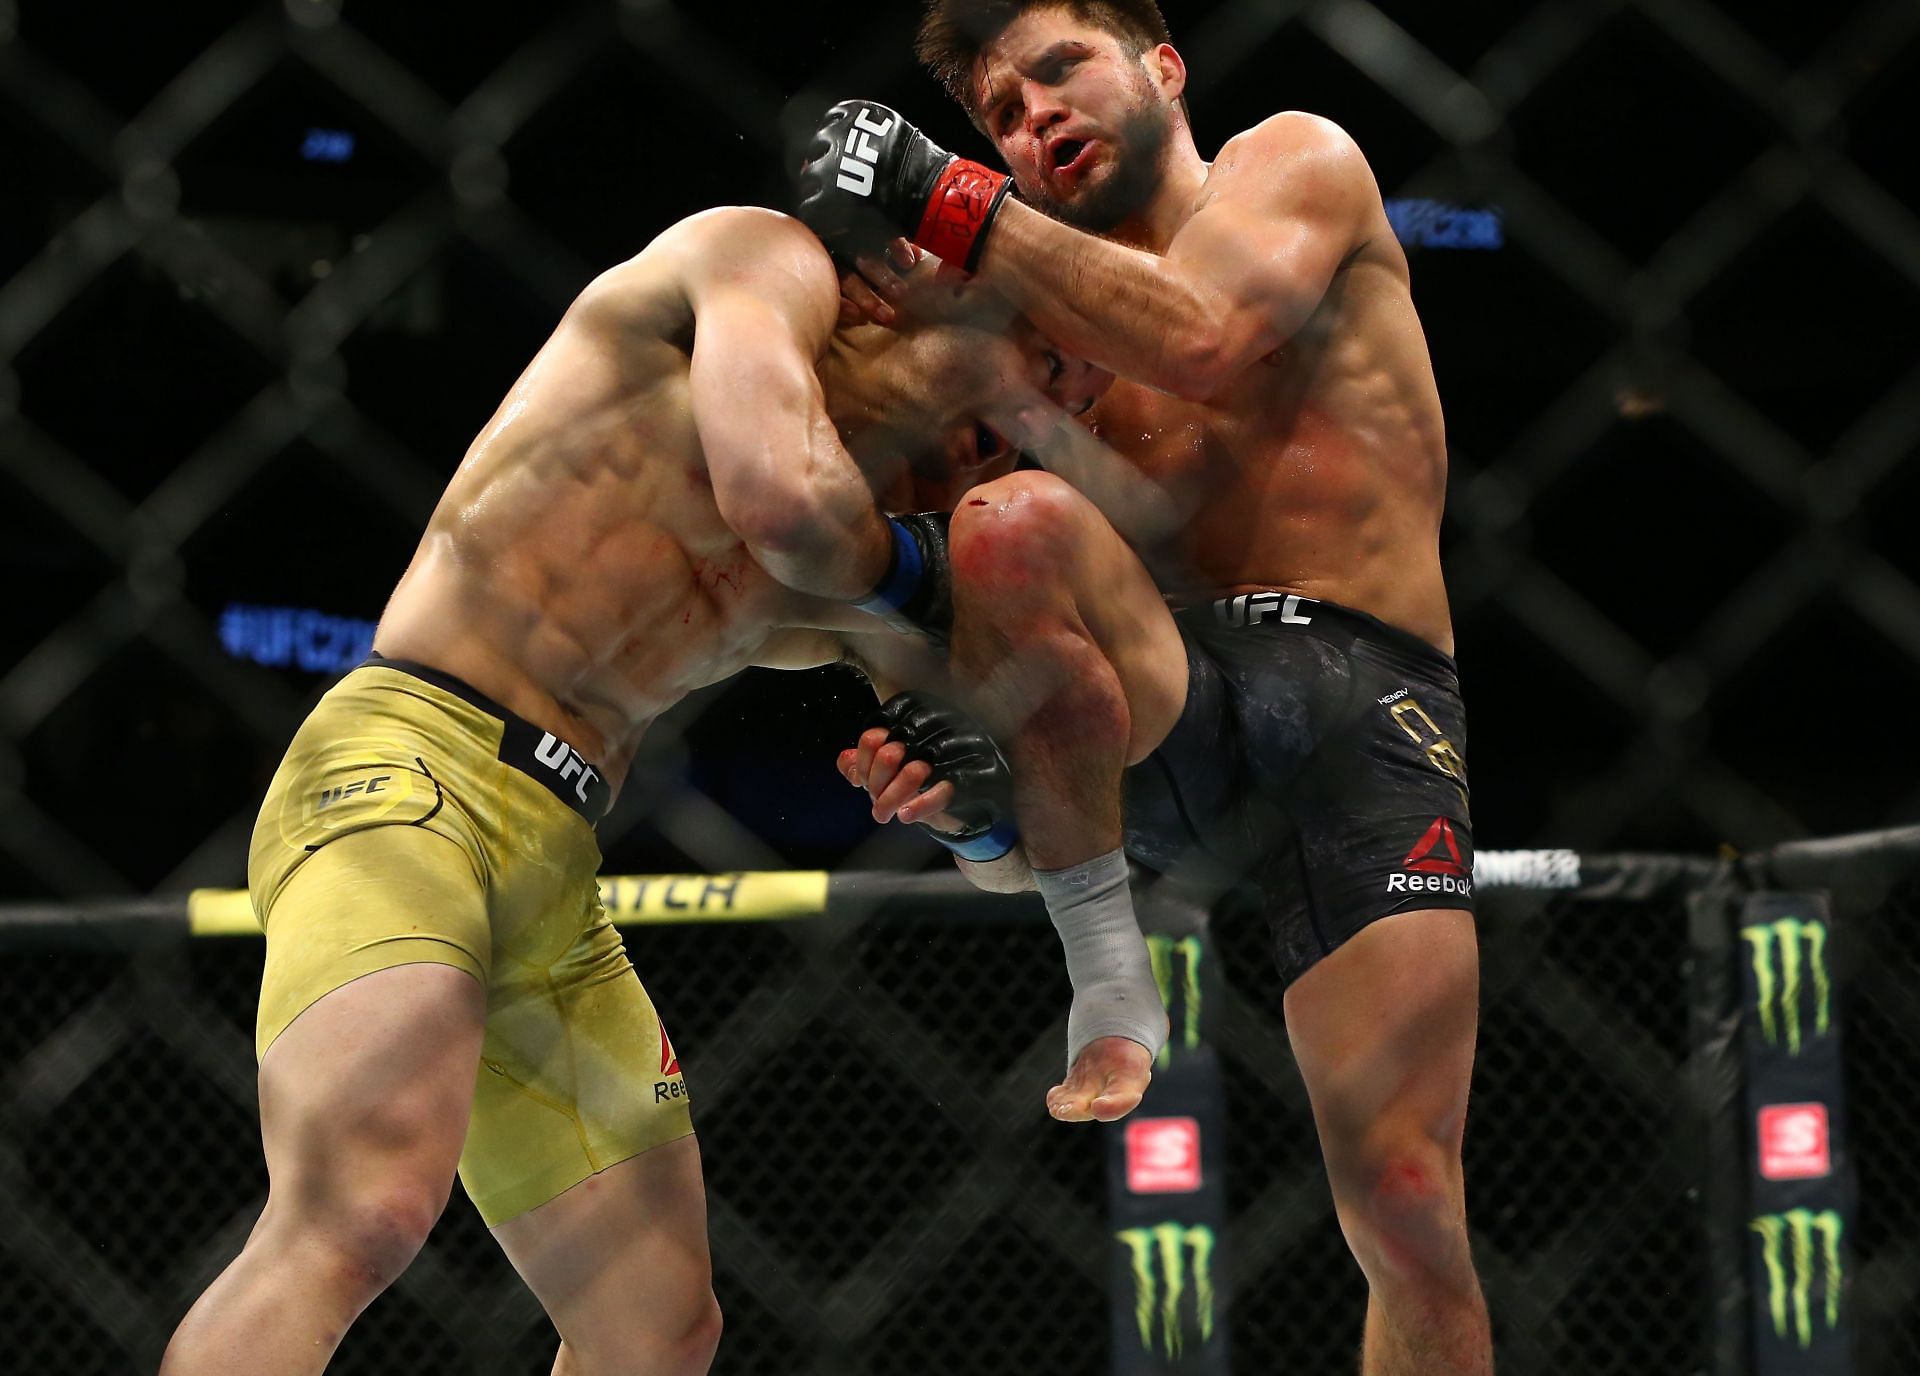 Henry Cejudo was ruthless in his win over Marlon Moraes